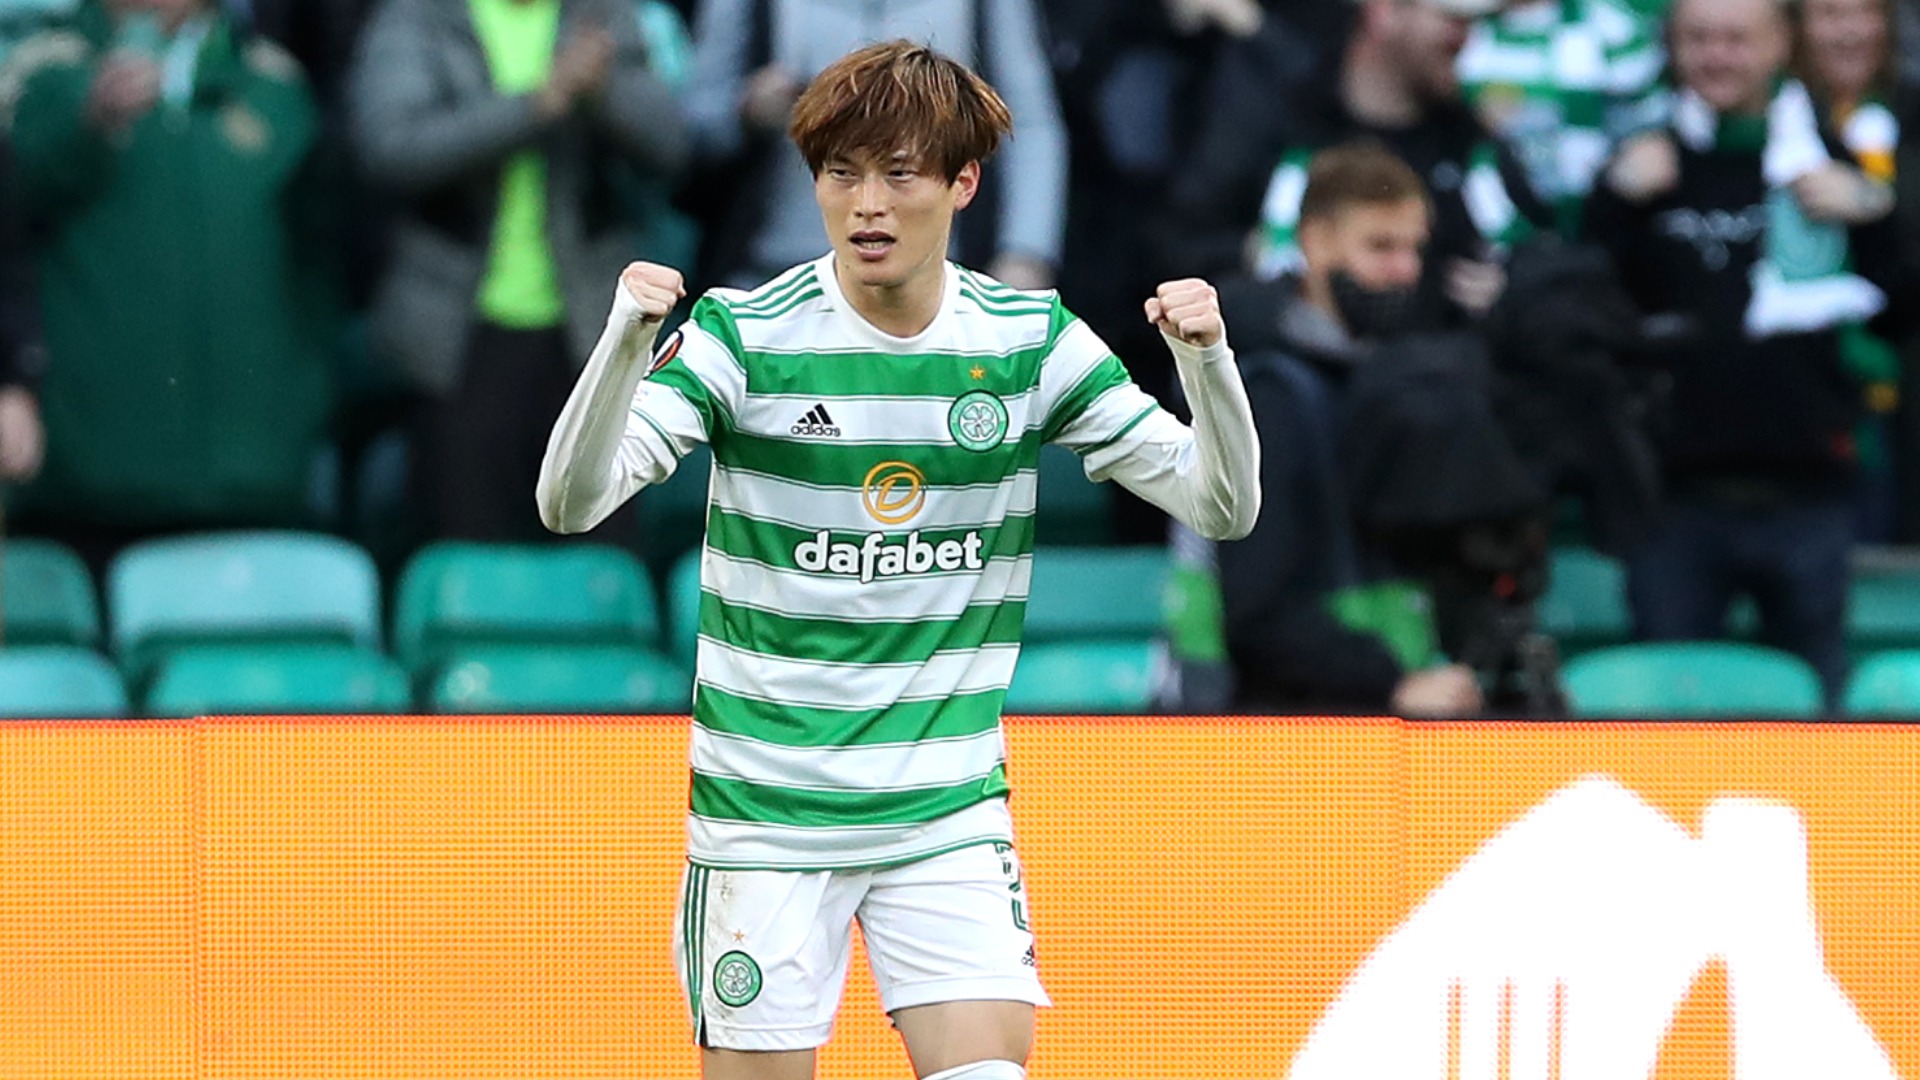 Celtic 2-0 Ferencvaros: Kyogo helps get Bhoys off the mark in Europa League